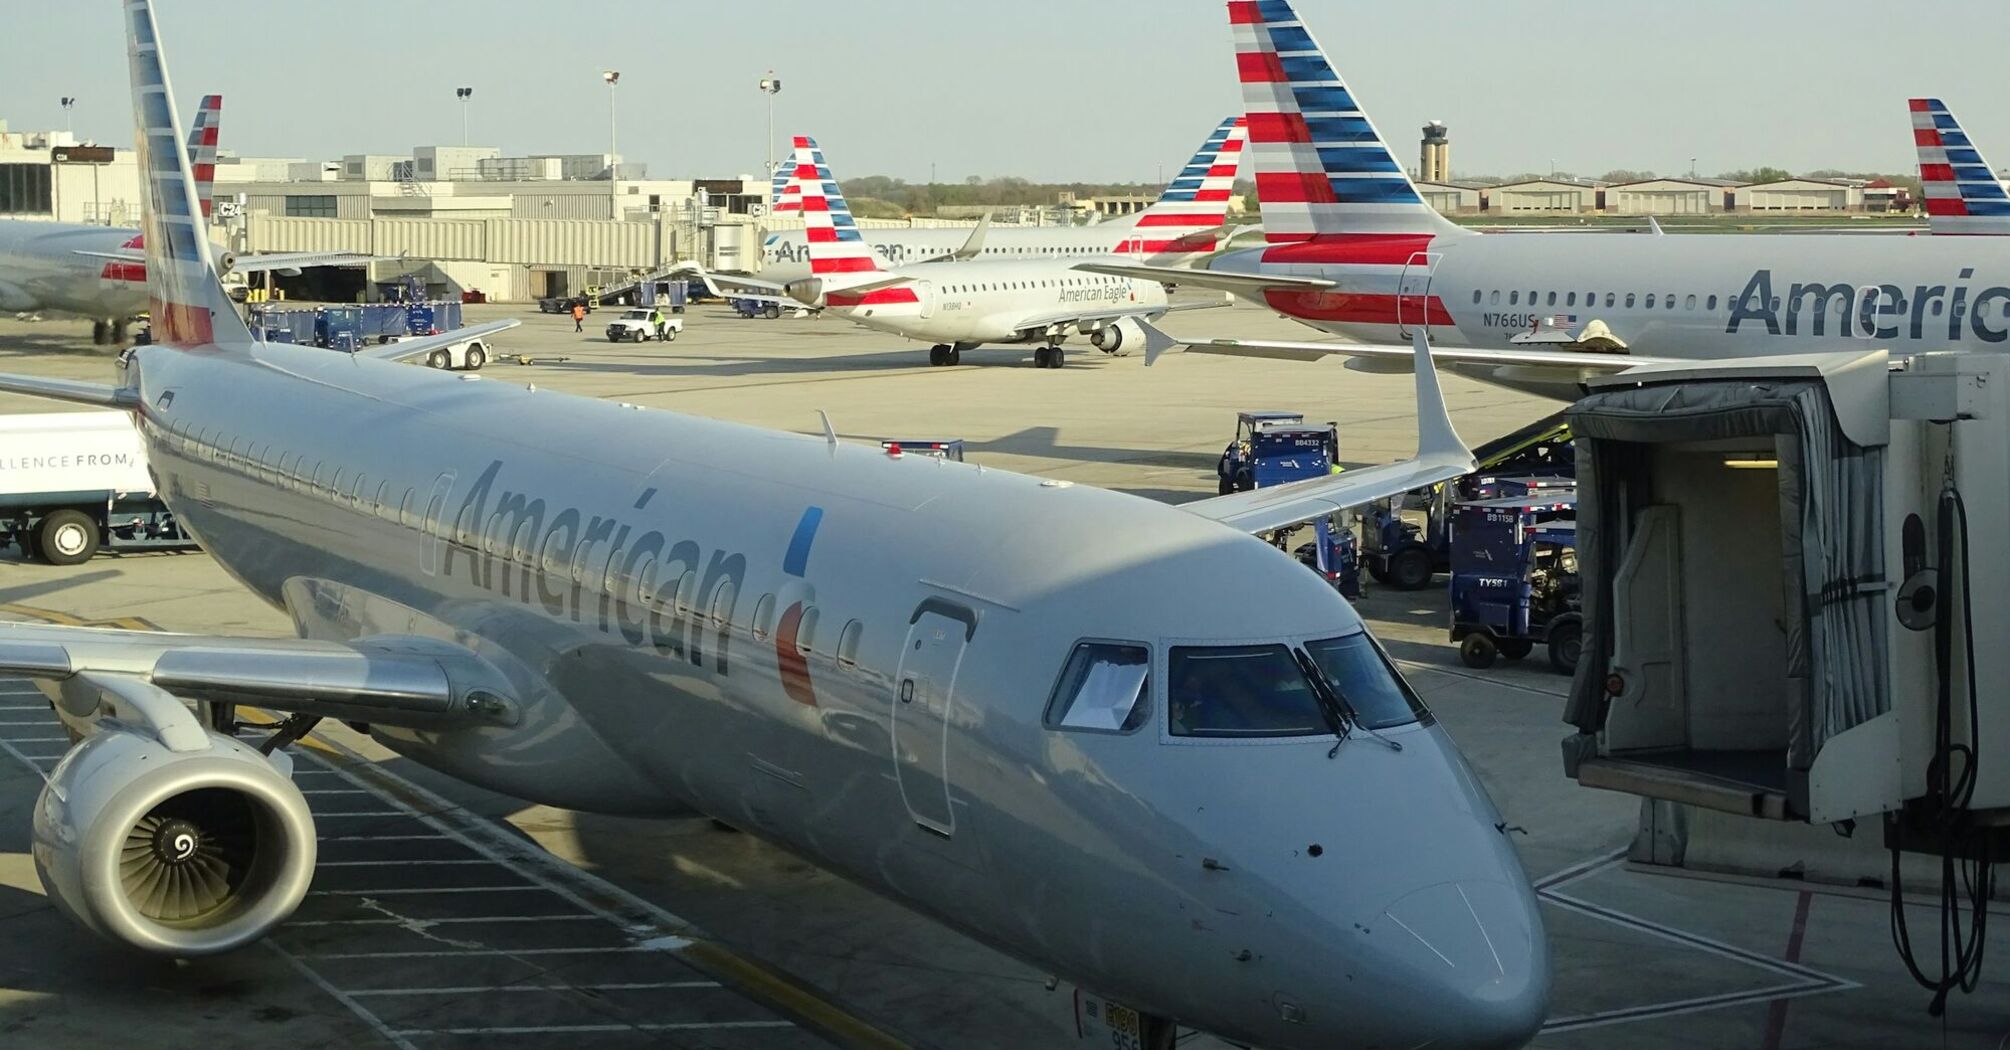 American Airlines aircraft parked at an airport gate